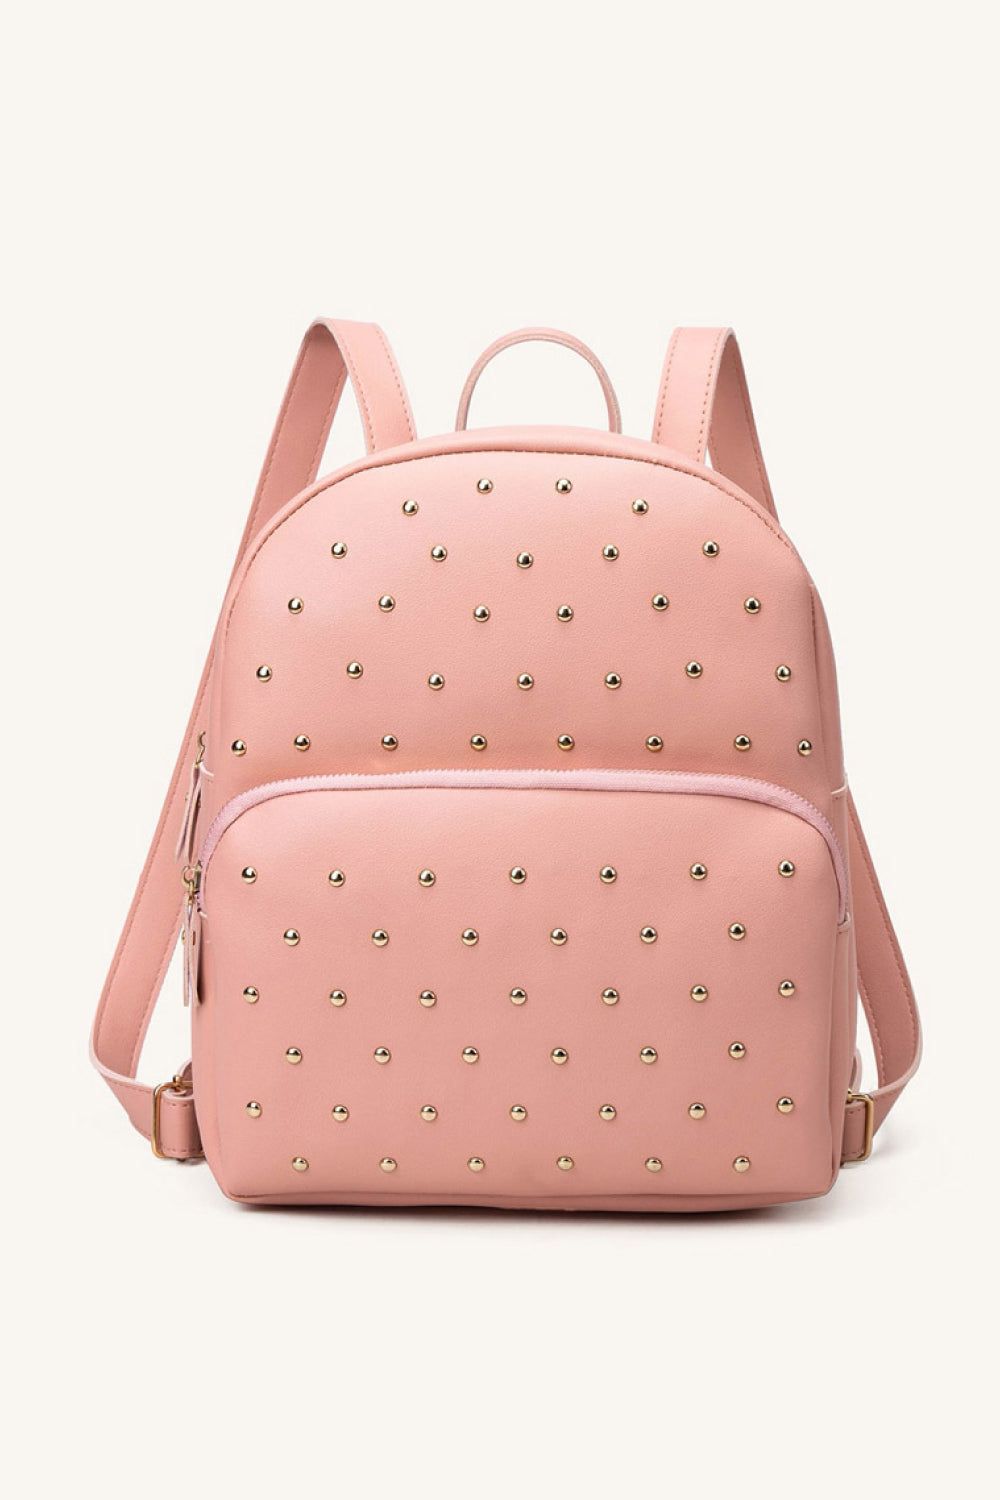 Studded PU Leather Backpack - By Baano